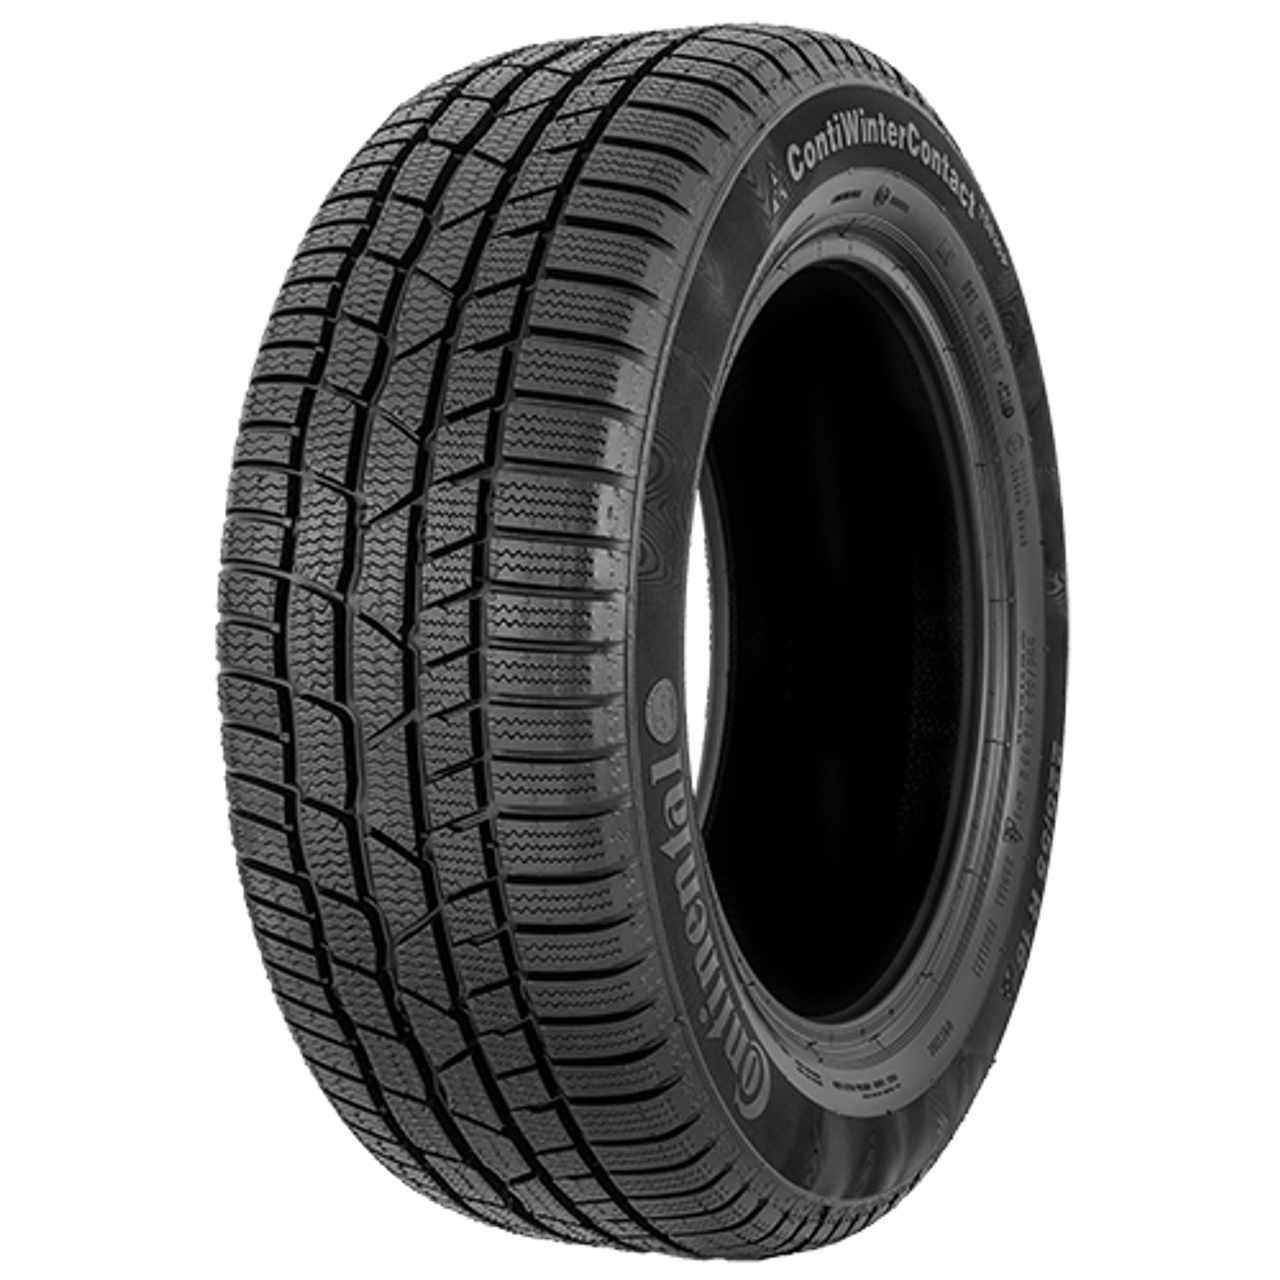 CONTINENTAL CONTIWINTERCONTACT TS 830 P (*) SSR 225/55R16 95H BSW